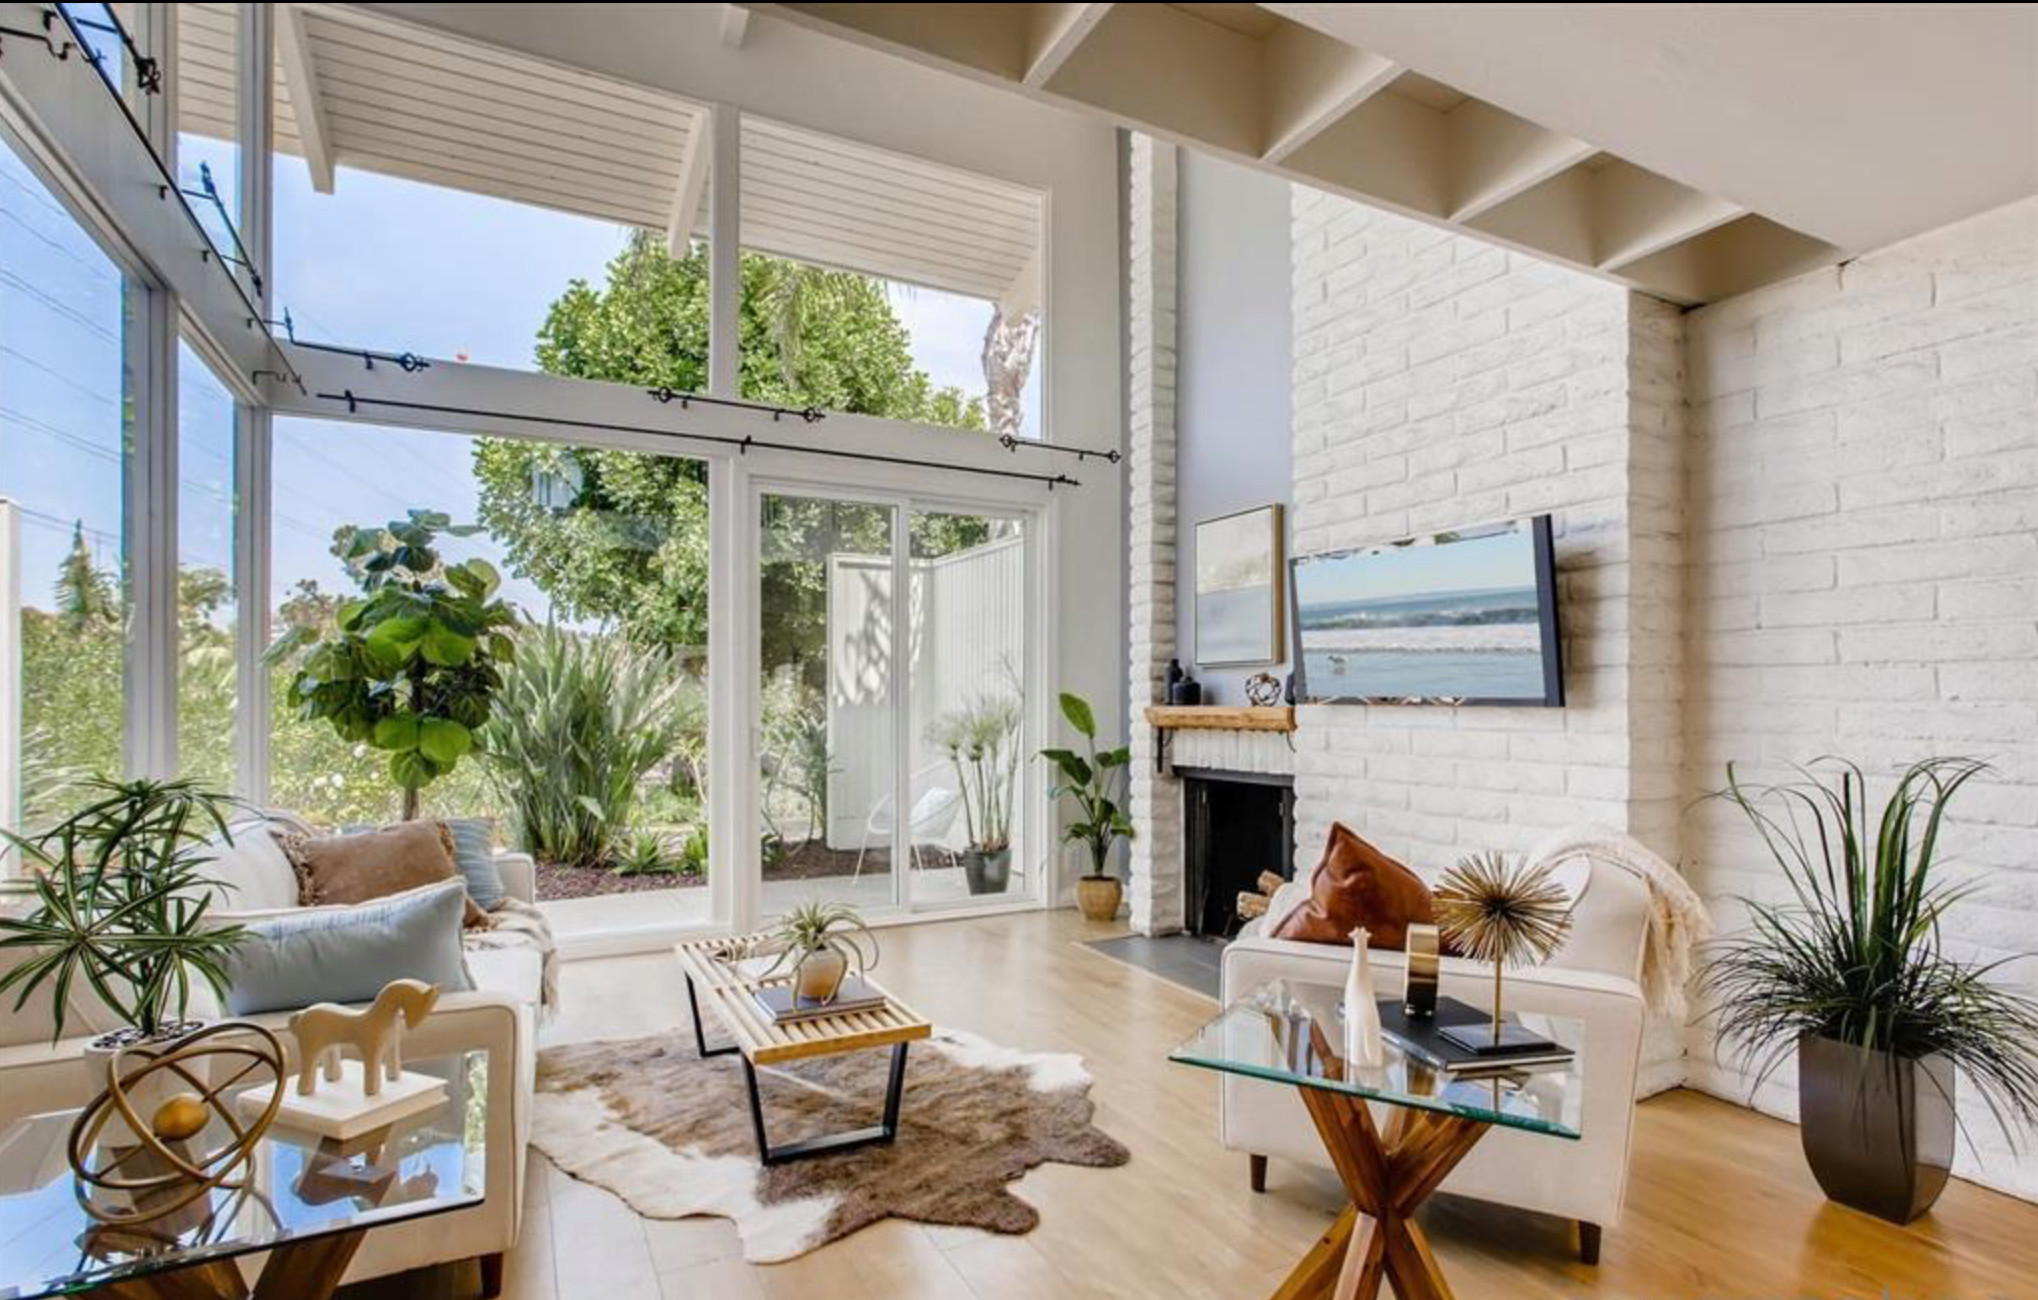 Carlsbad CA Mid-century modern home staging